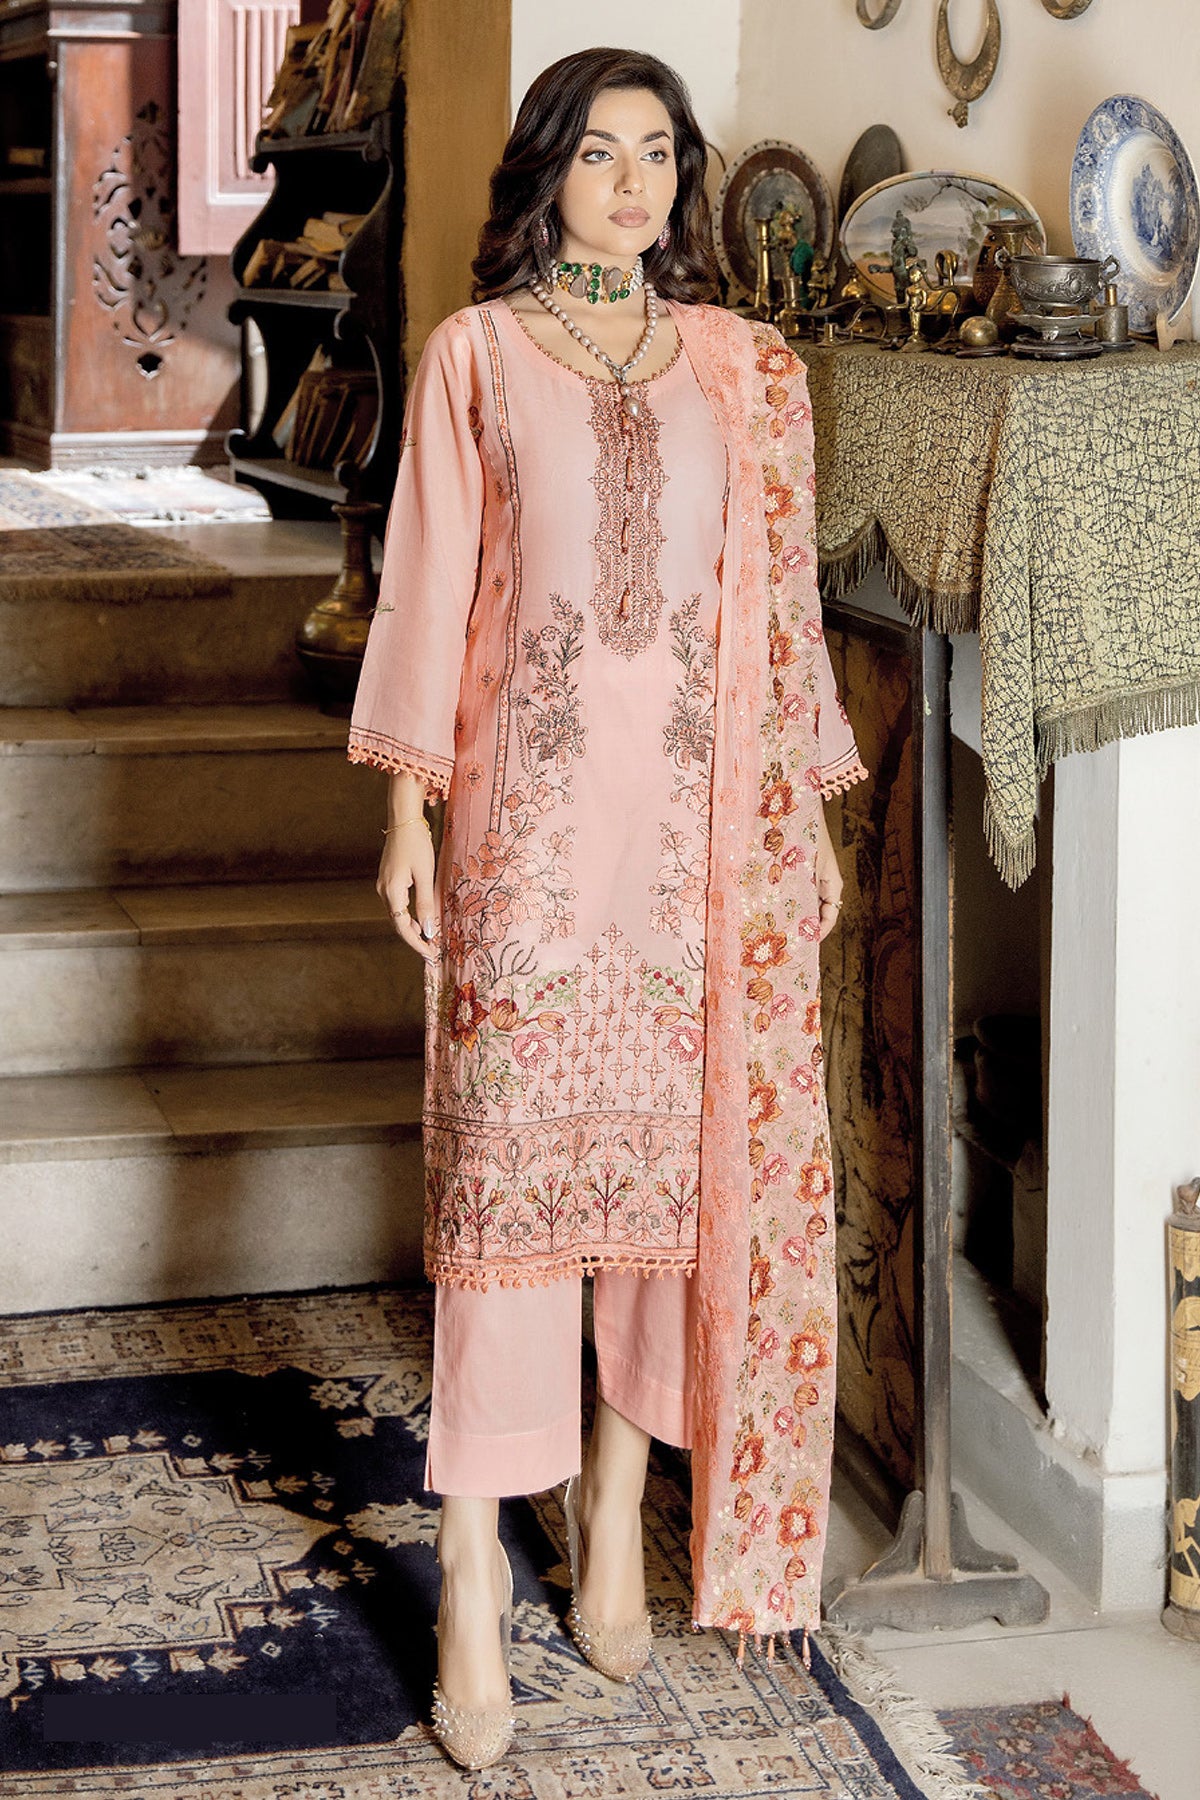 Designer Stitched Pakistani Suit at Rs.1050/10 in surat offer by Thankar  India E commerce